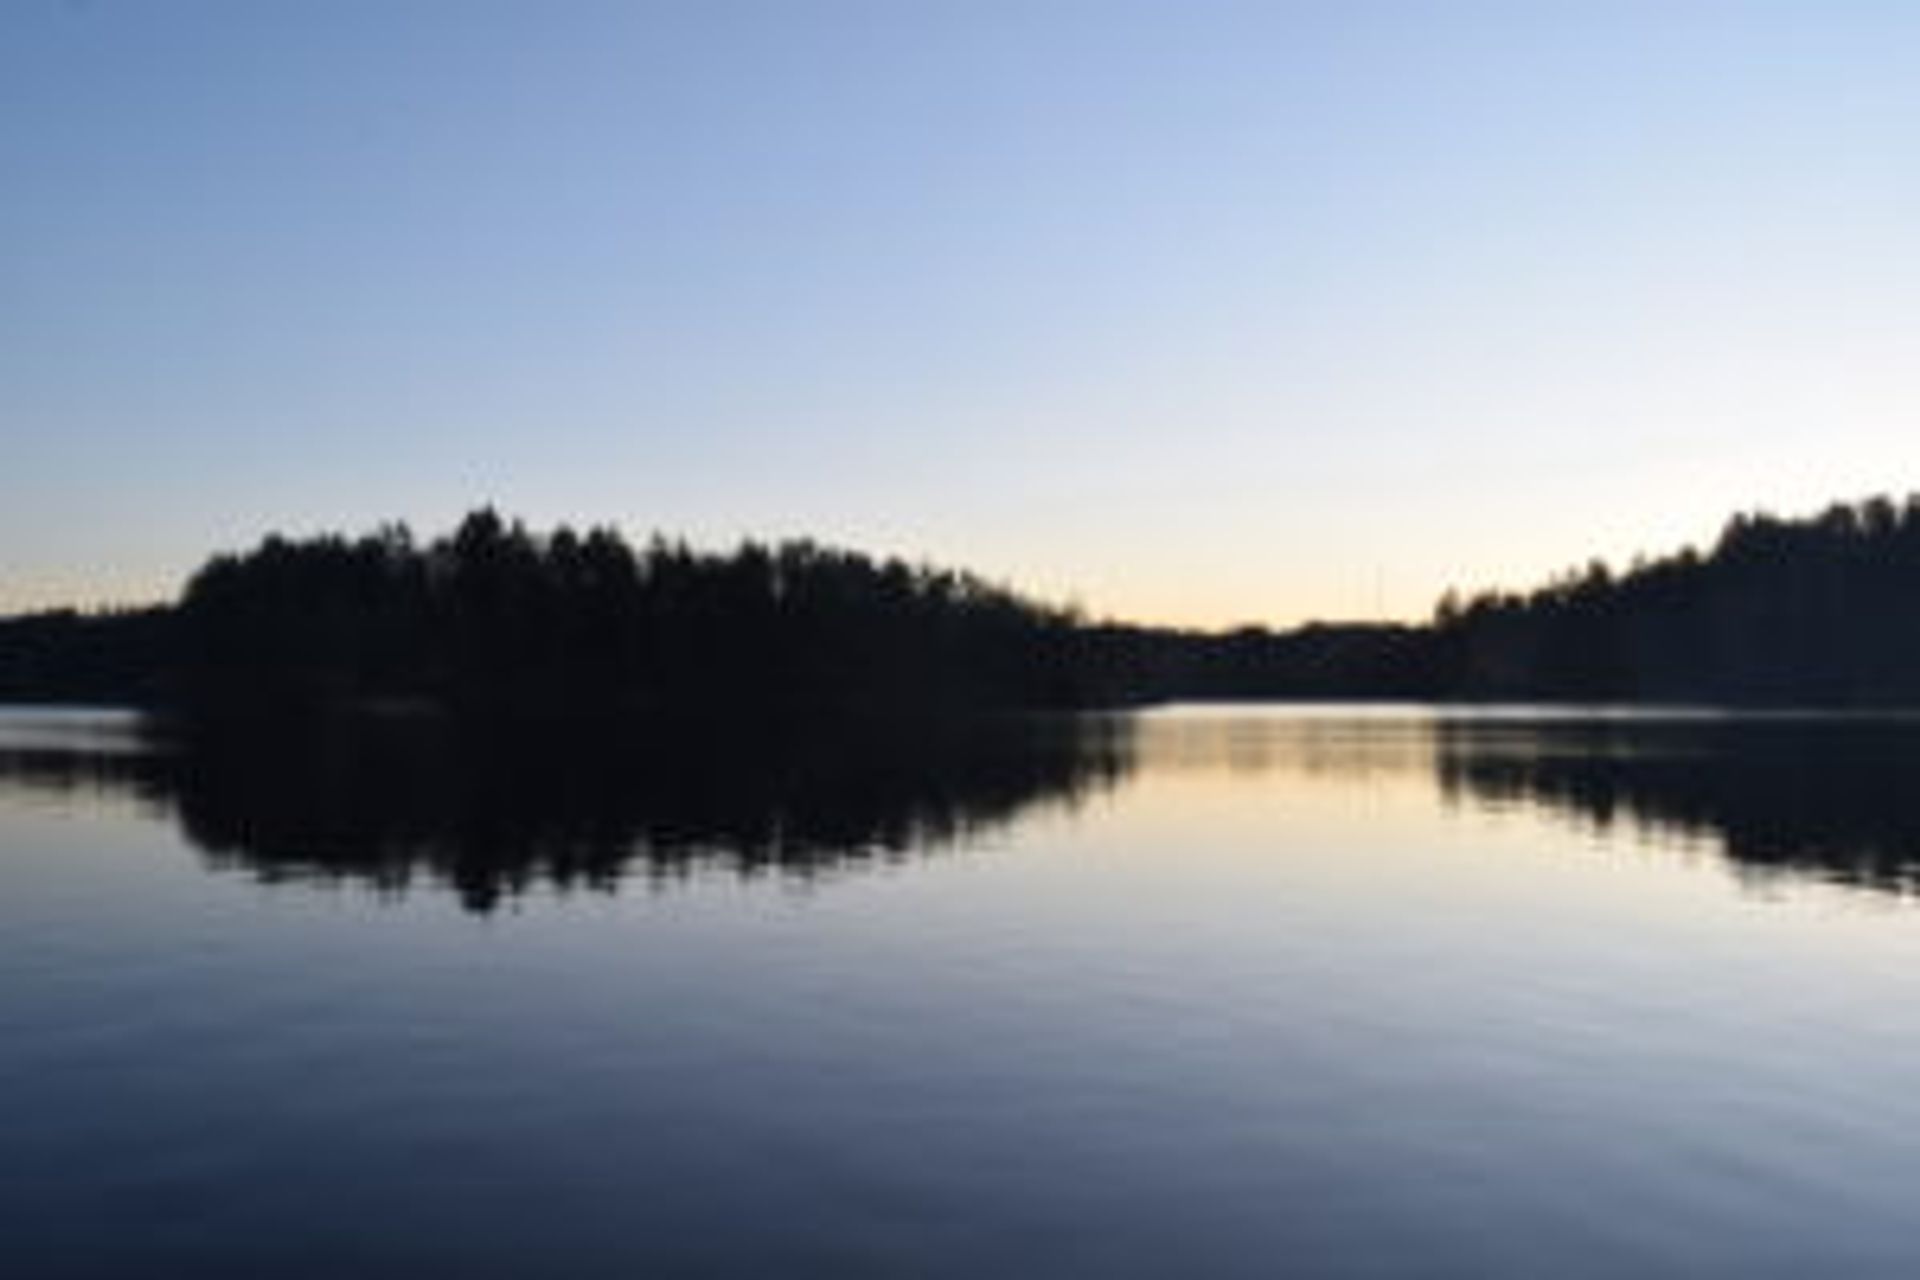 The lake, Delsjön. The water is completely still and the forrest is reflected in the water.